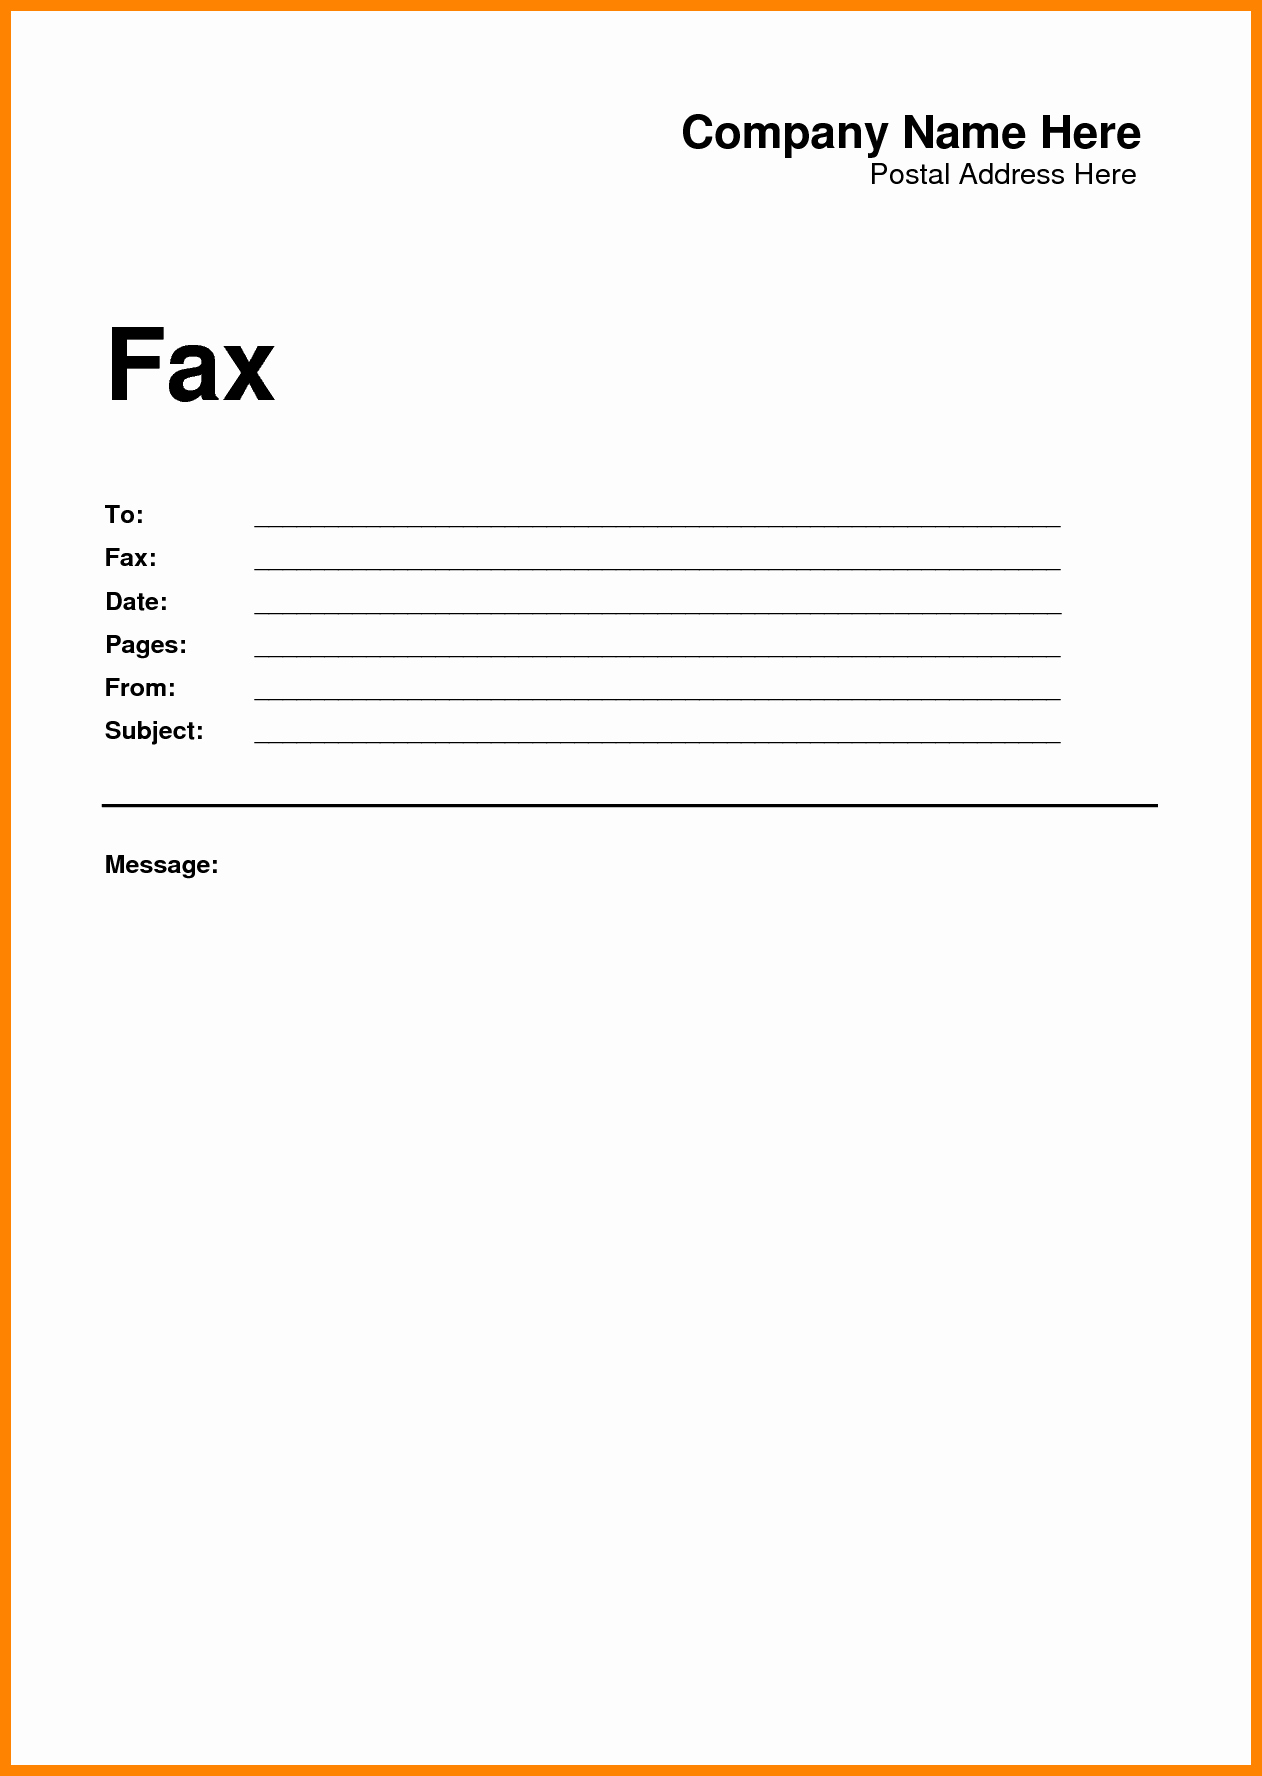 Fax Cover Sheet Sample Pdf Best Of 6 Free Fax Cover Sheet